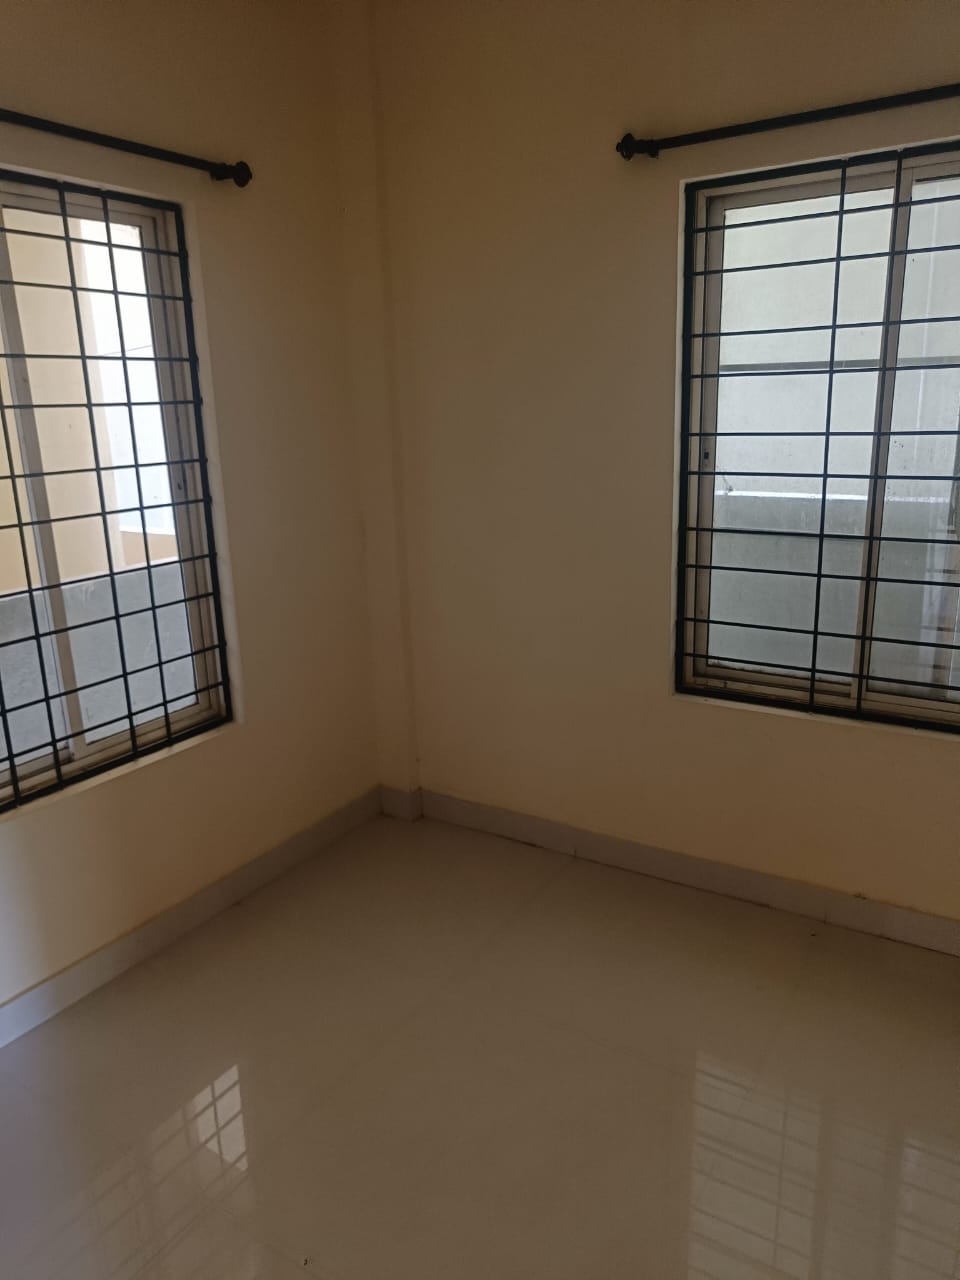 2 BHK Residential Apartment for Lease Only at JAML2 - 2990 in Nandini Layout